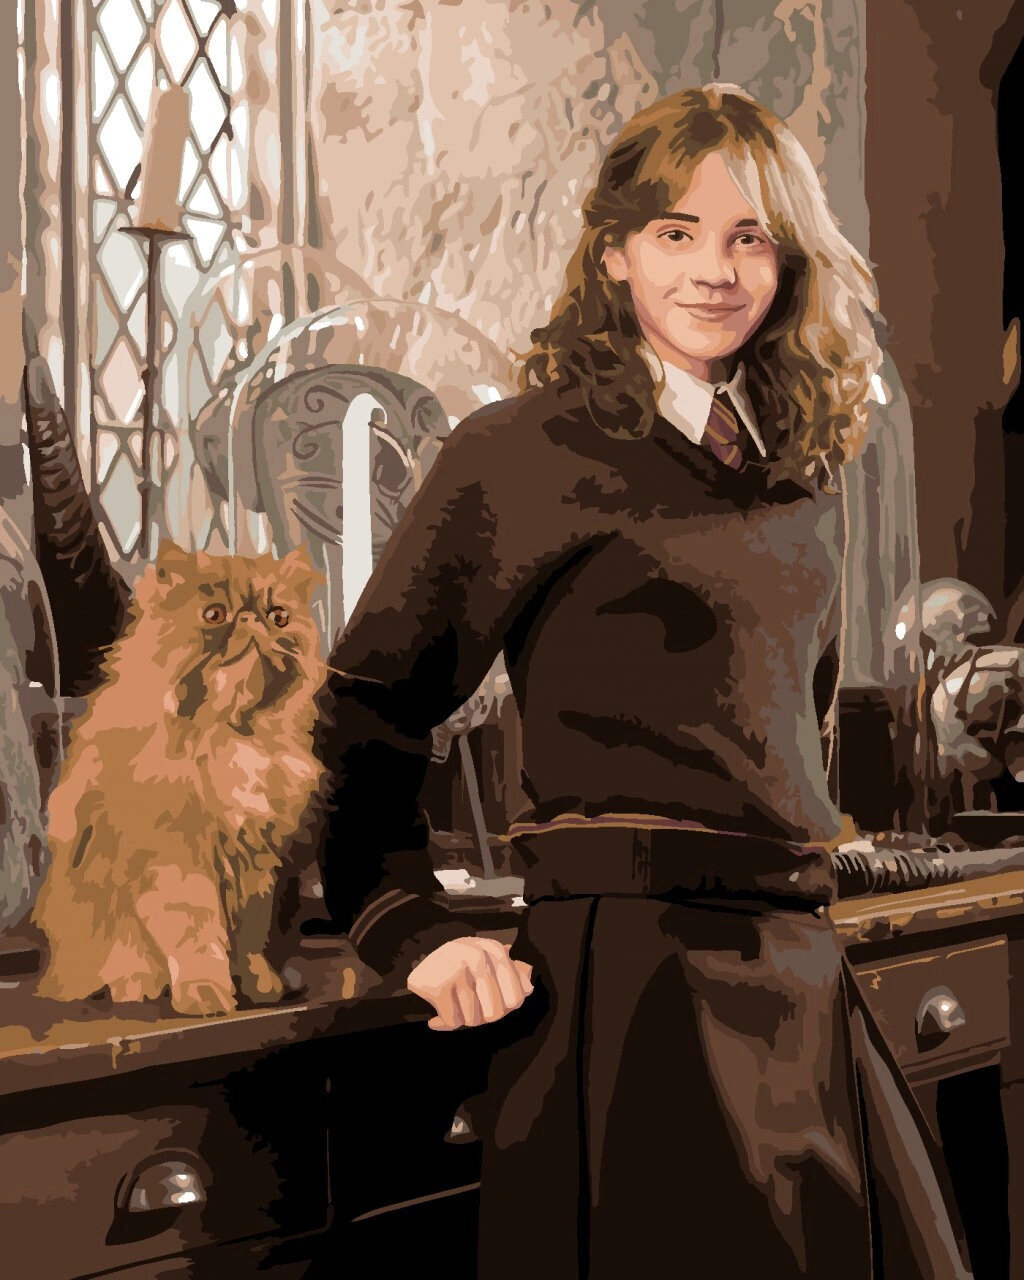 Painting by Numbers Zuty Painting by Numbers Hermione And Croockshanks In The Classroom (Harry Potter)